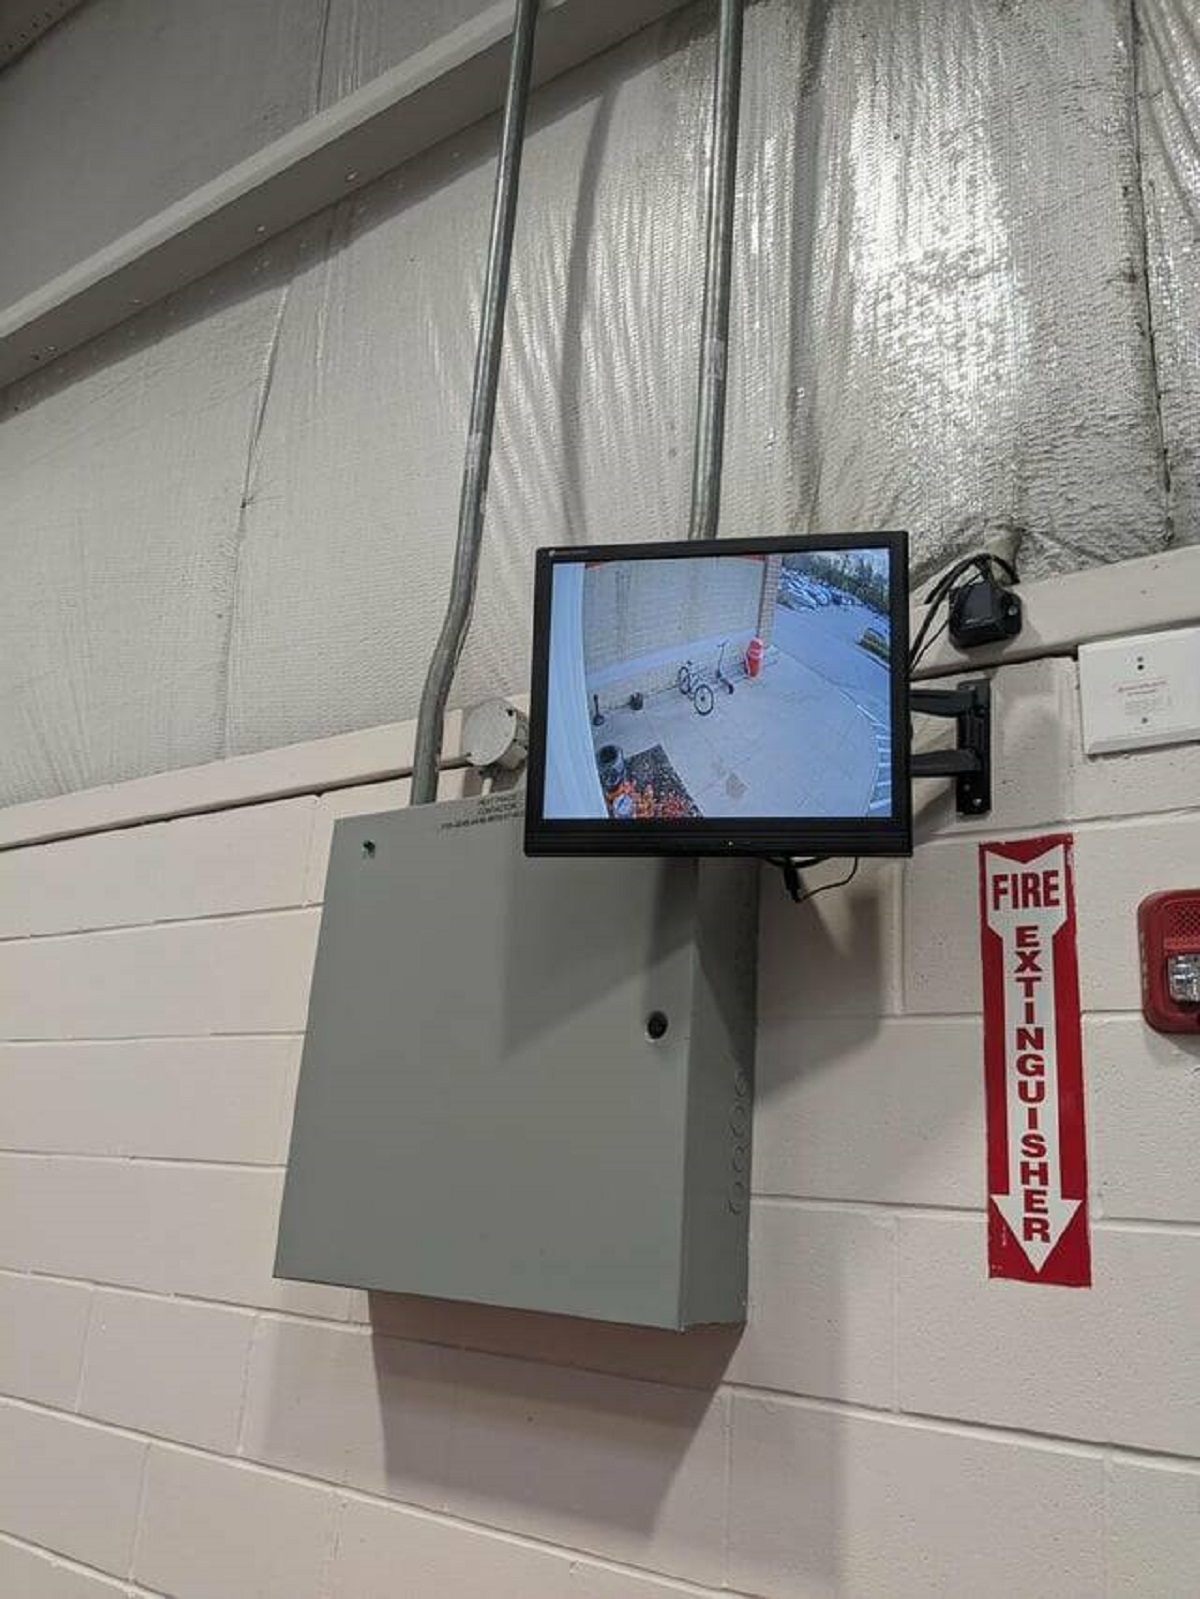 "My local Costco has a camera to watch your bike in the food court"